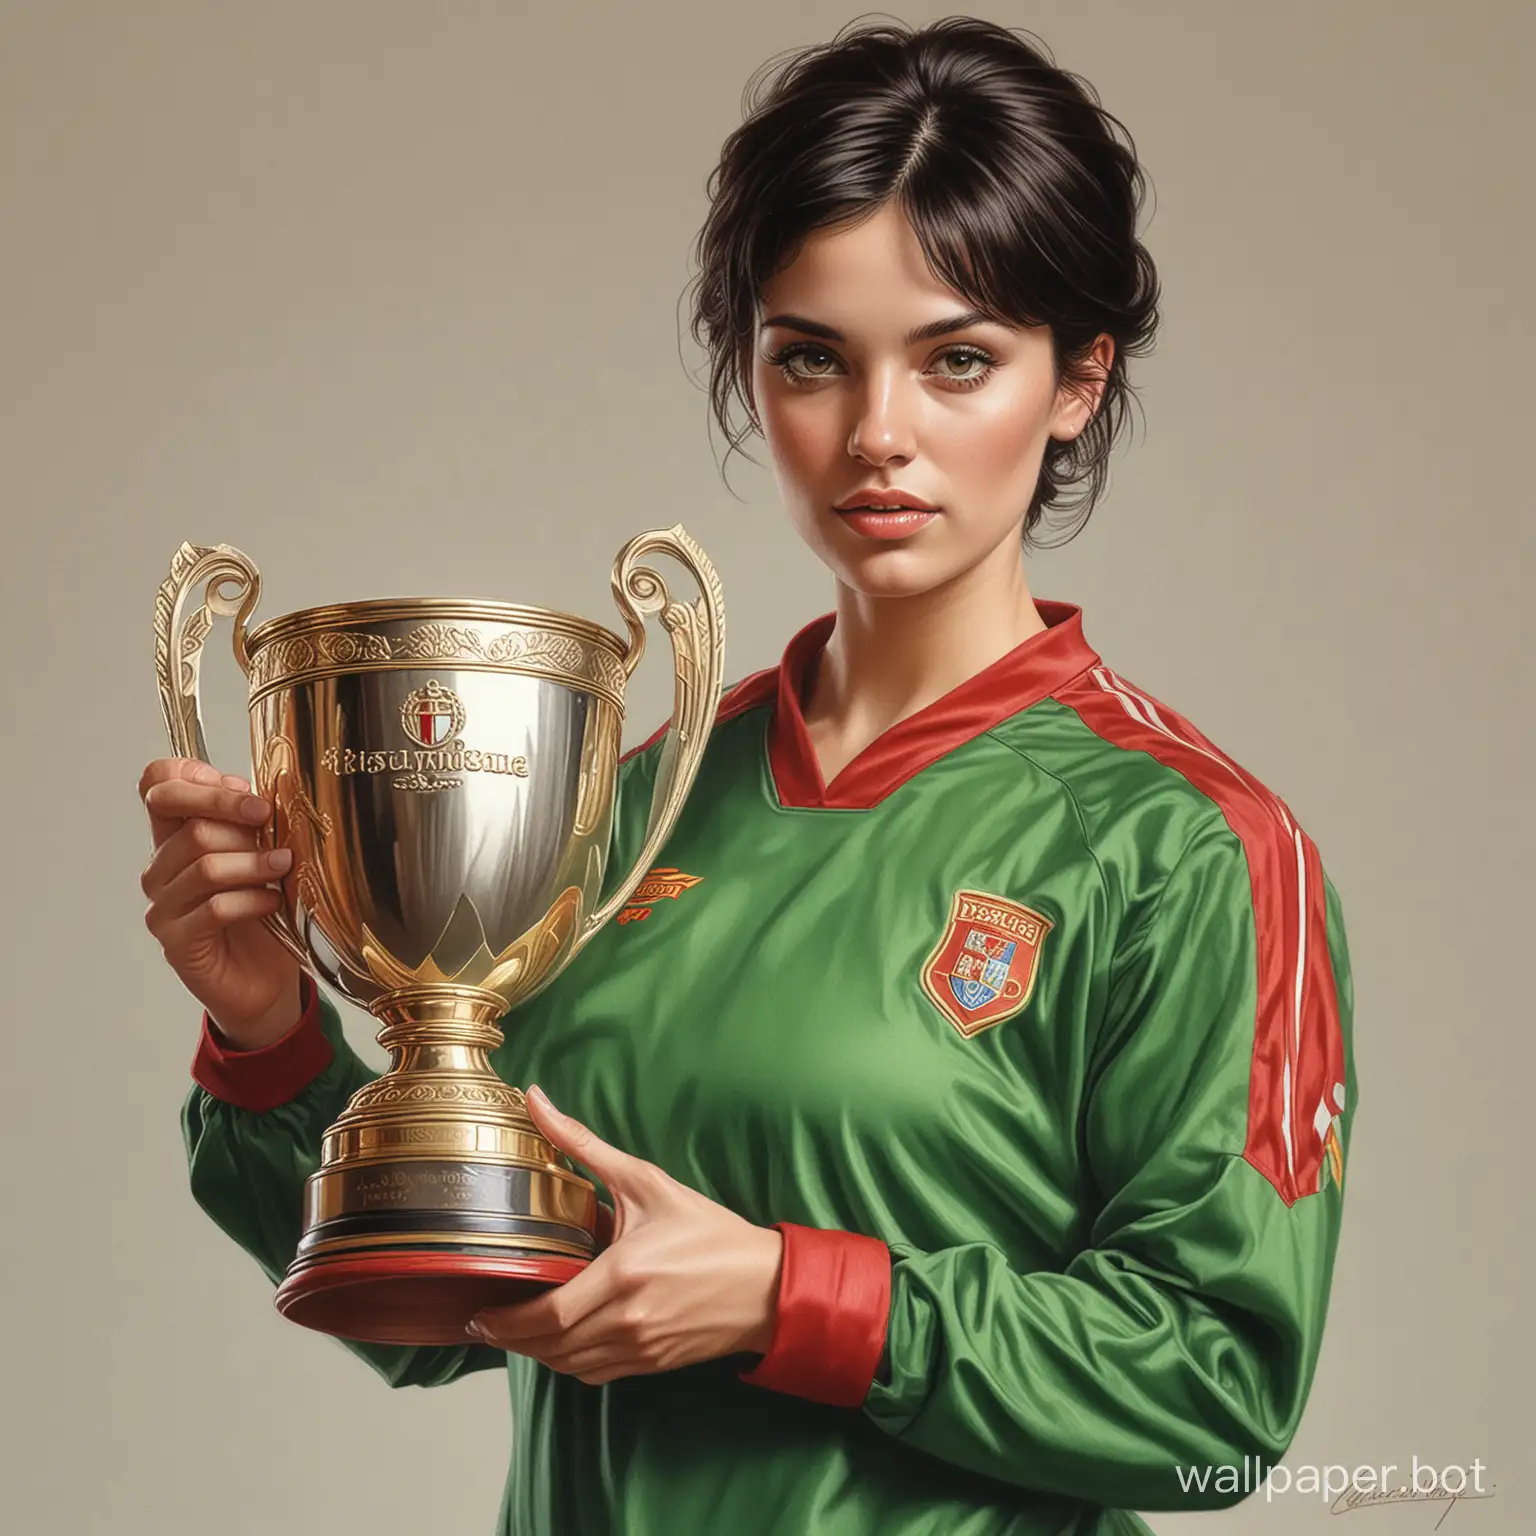 Realistic-Drawing-of-Elizabeth-von-Valentine-Holding-Champions-Cup-in-Soccer-Uniform